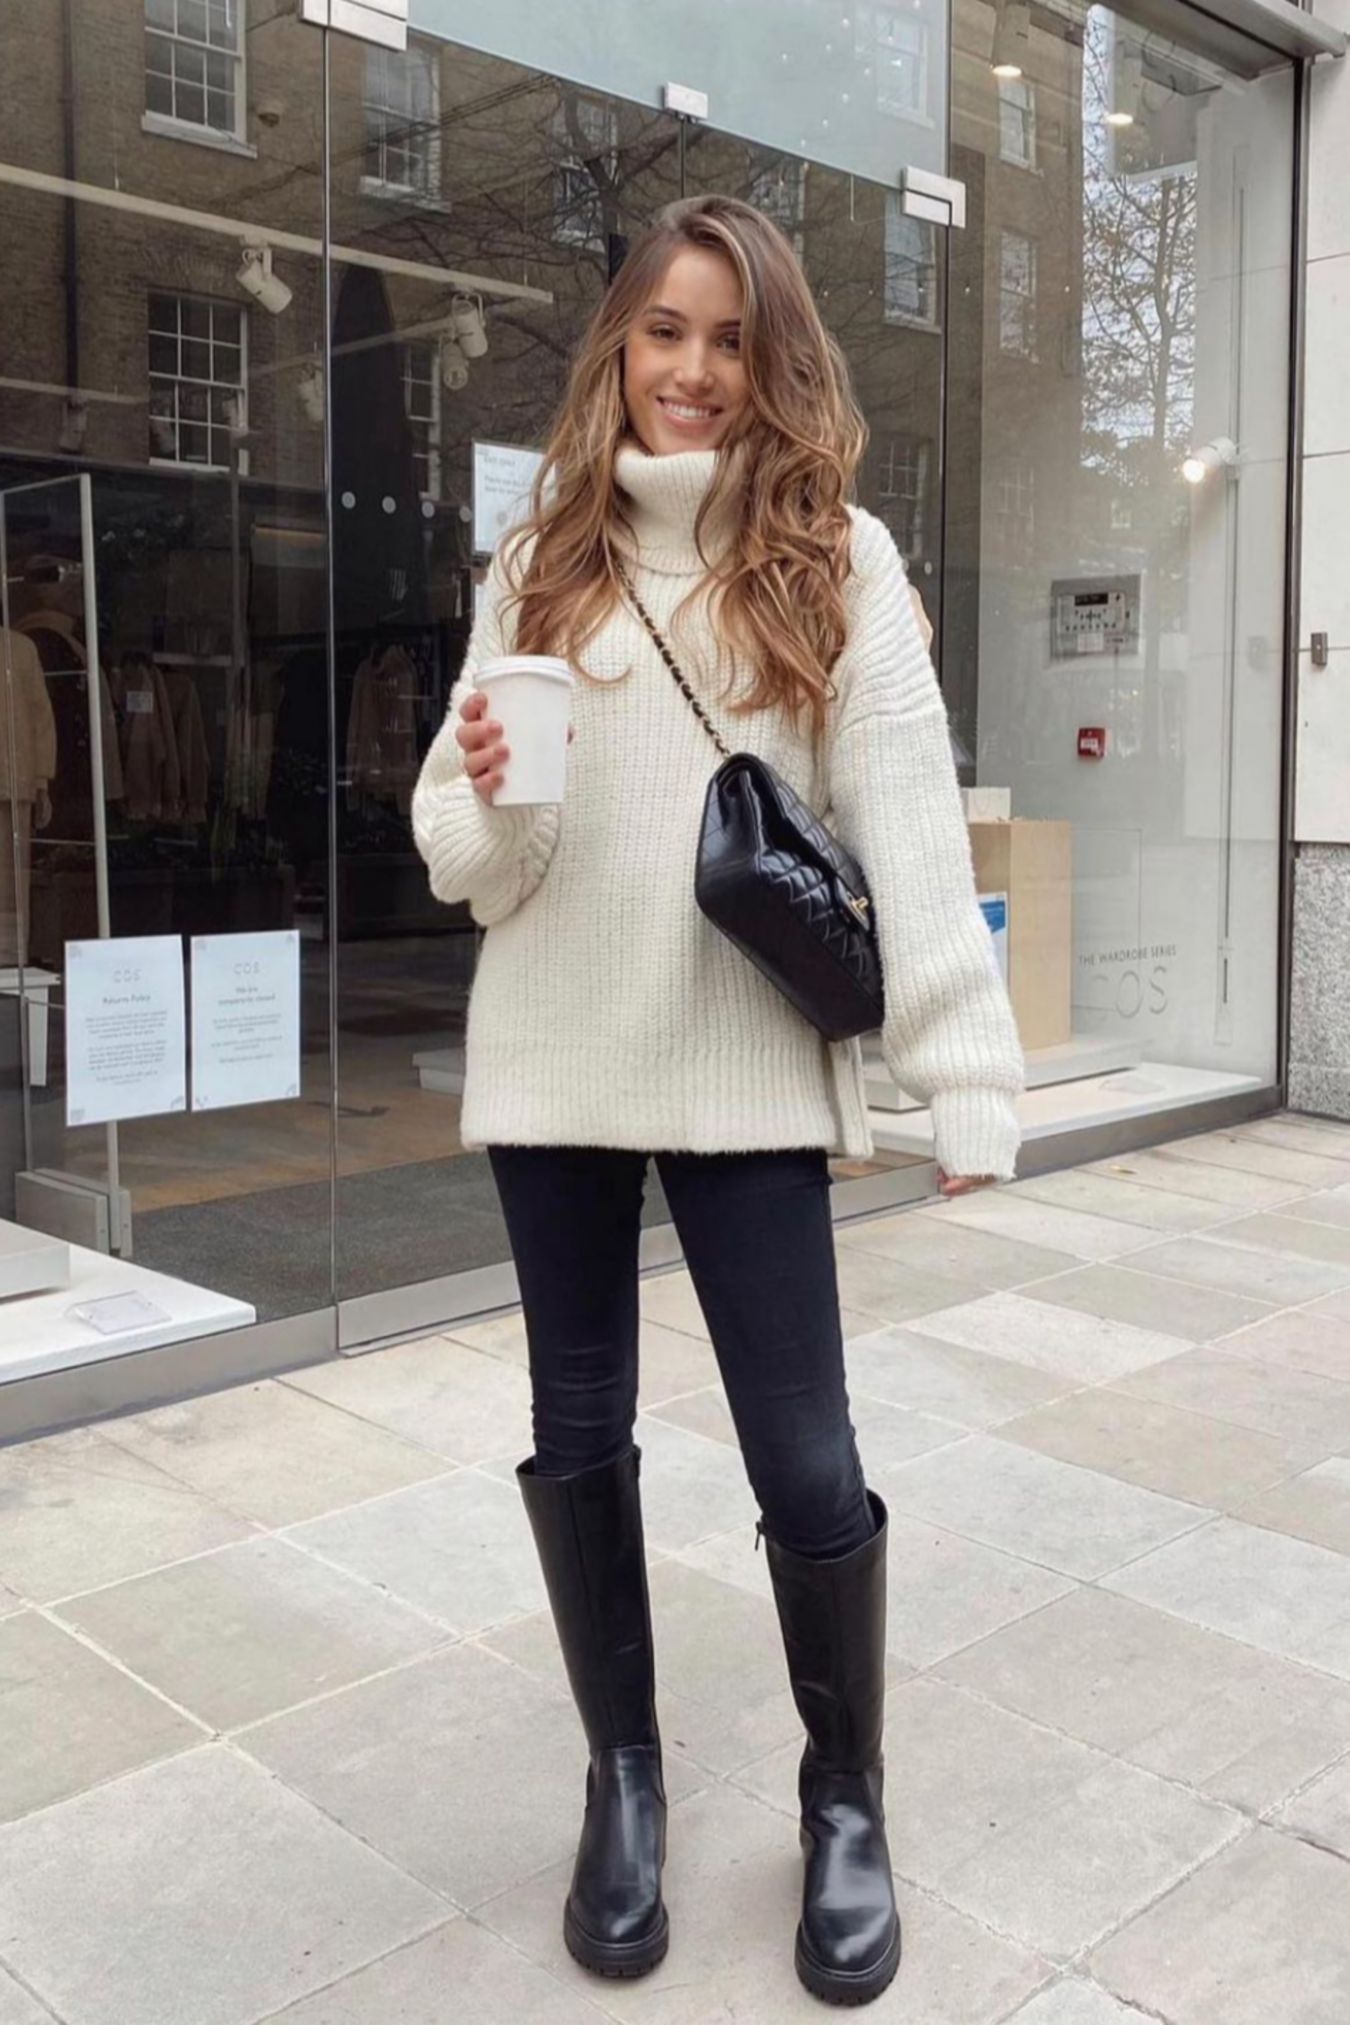 Chic Winter Date Outfit Ideas